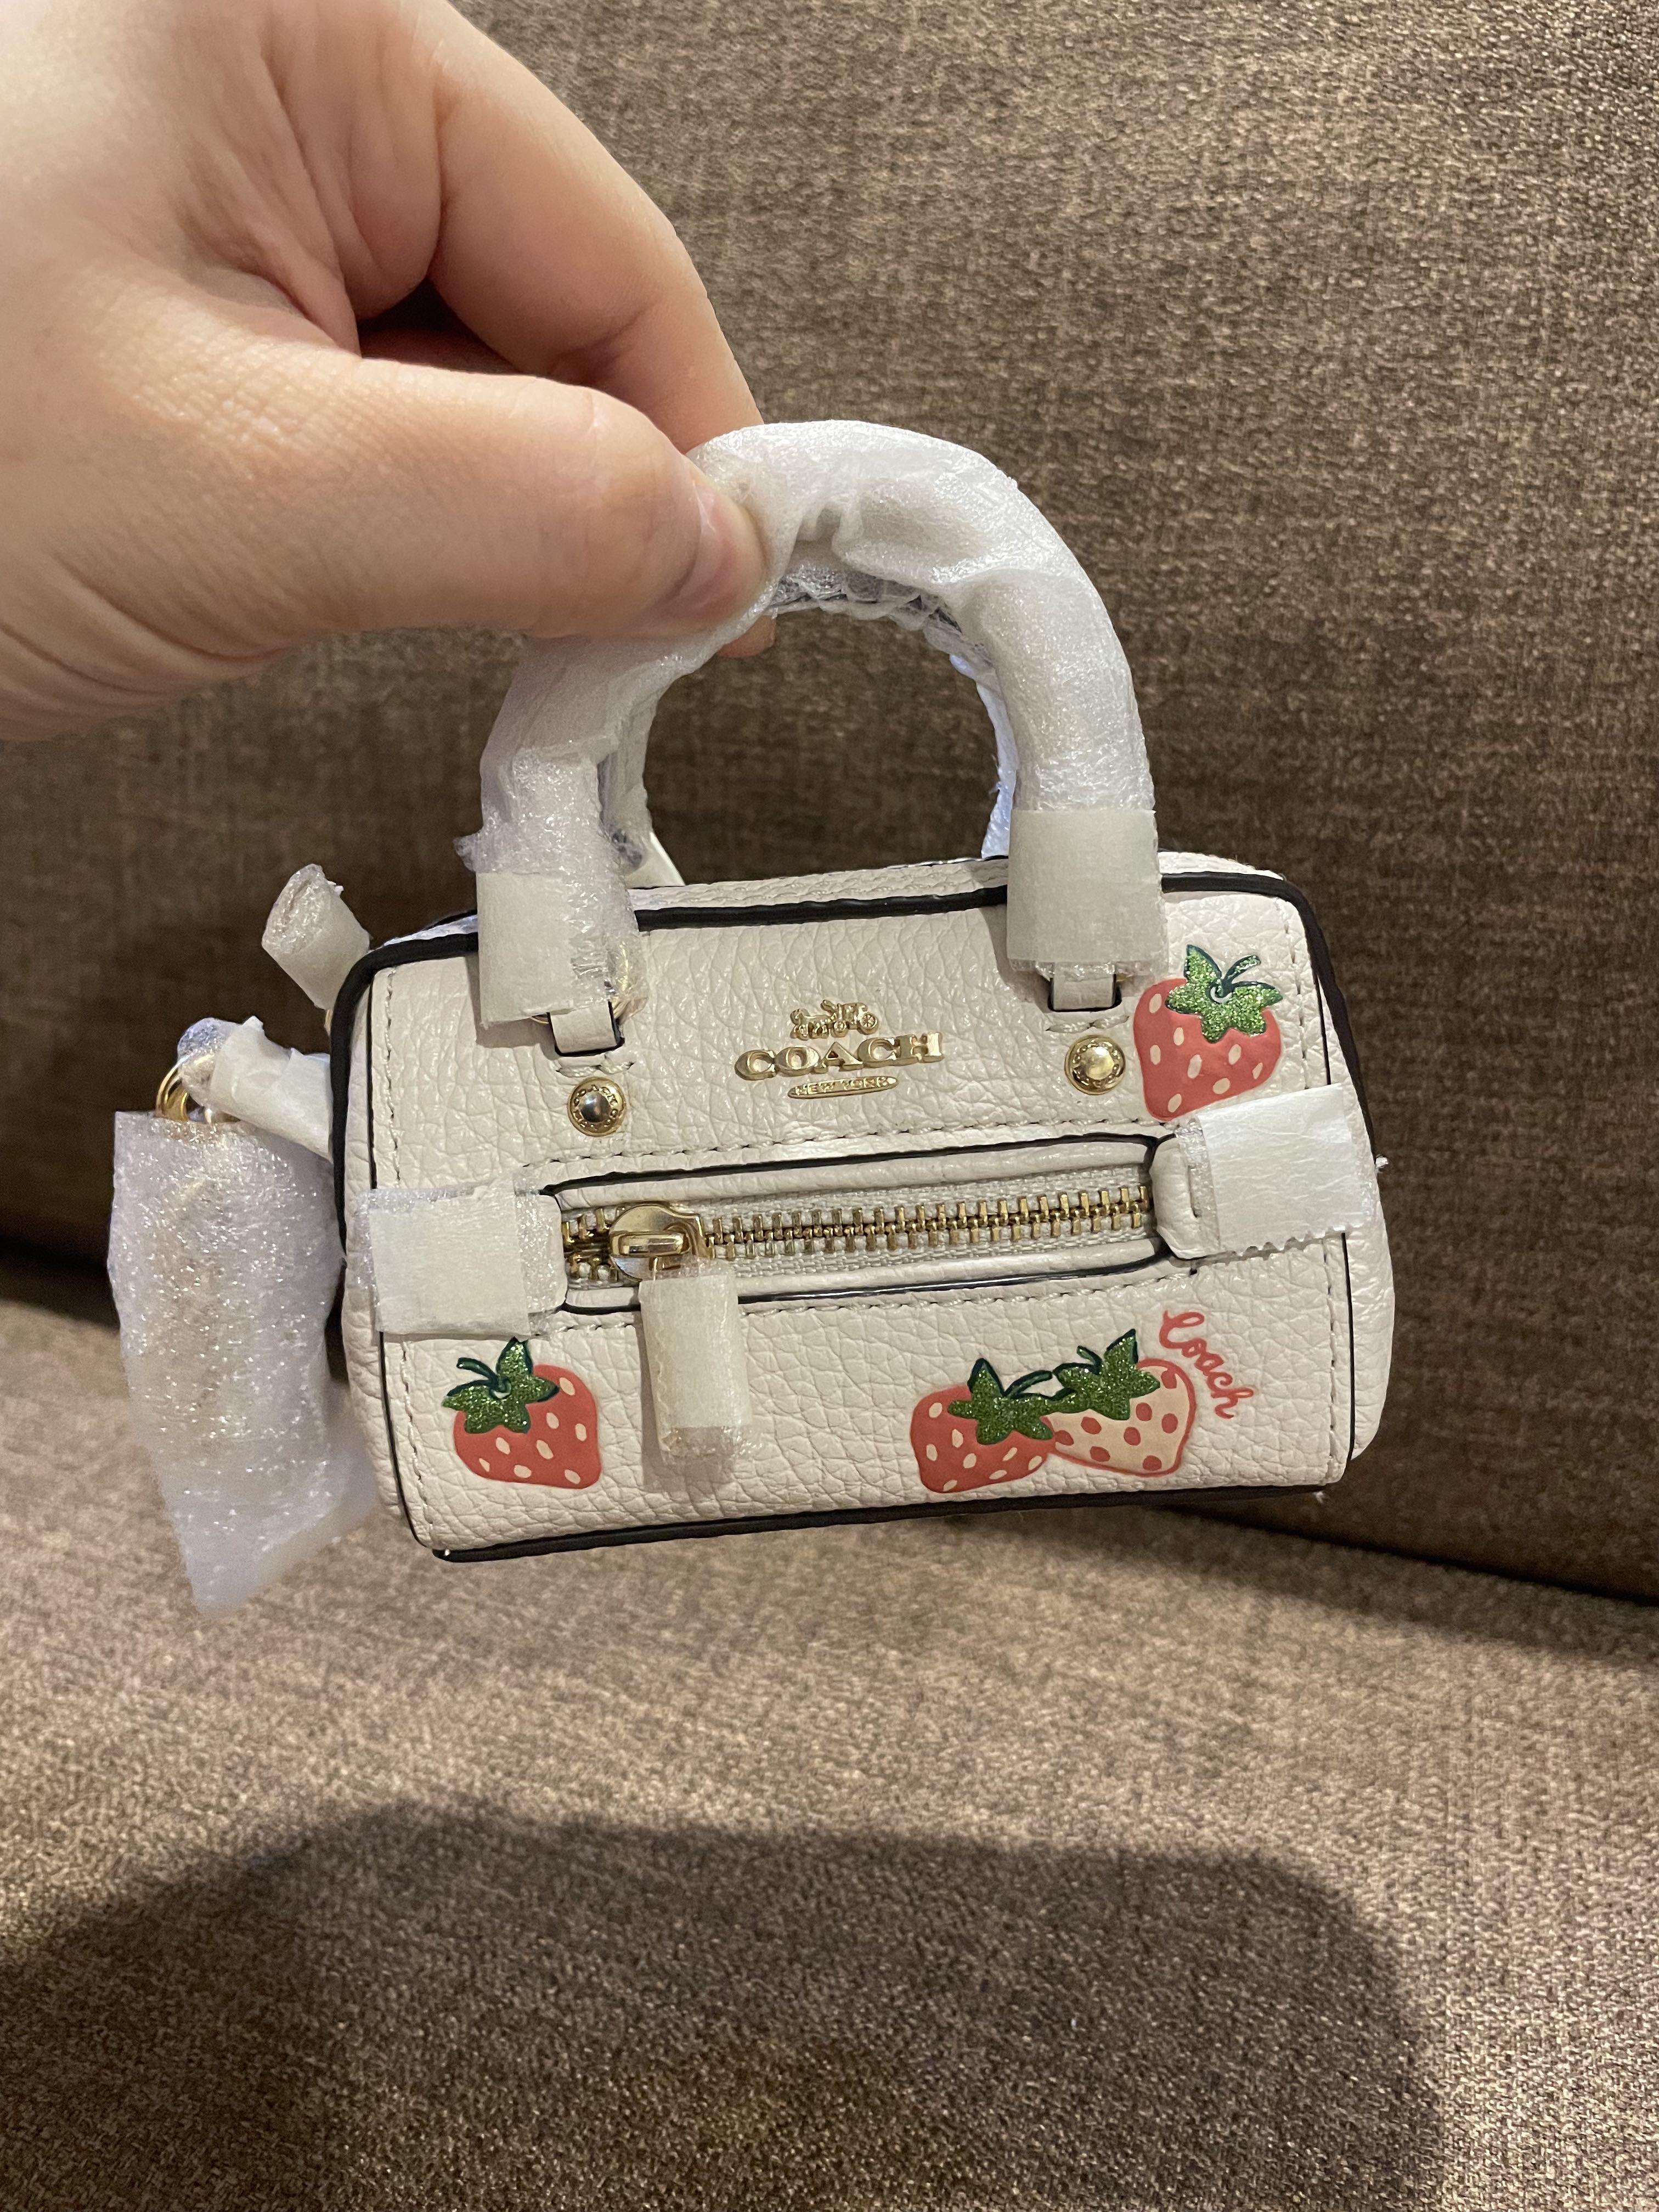 Coach Outlet Strawberry Bag Charm